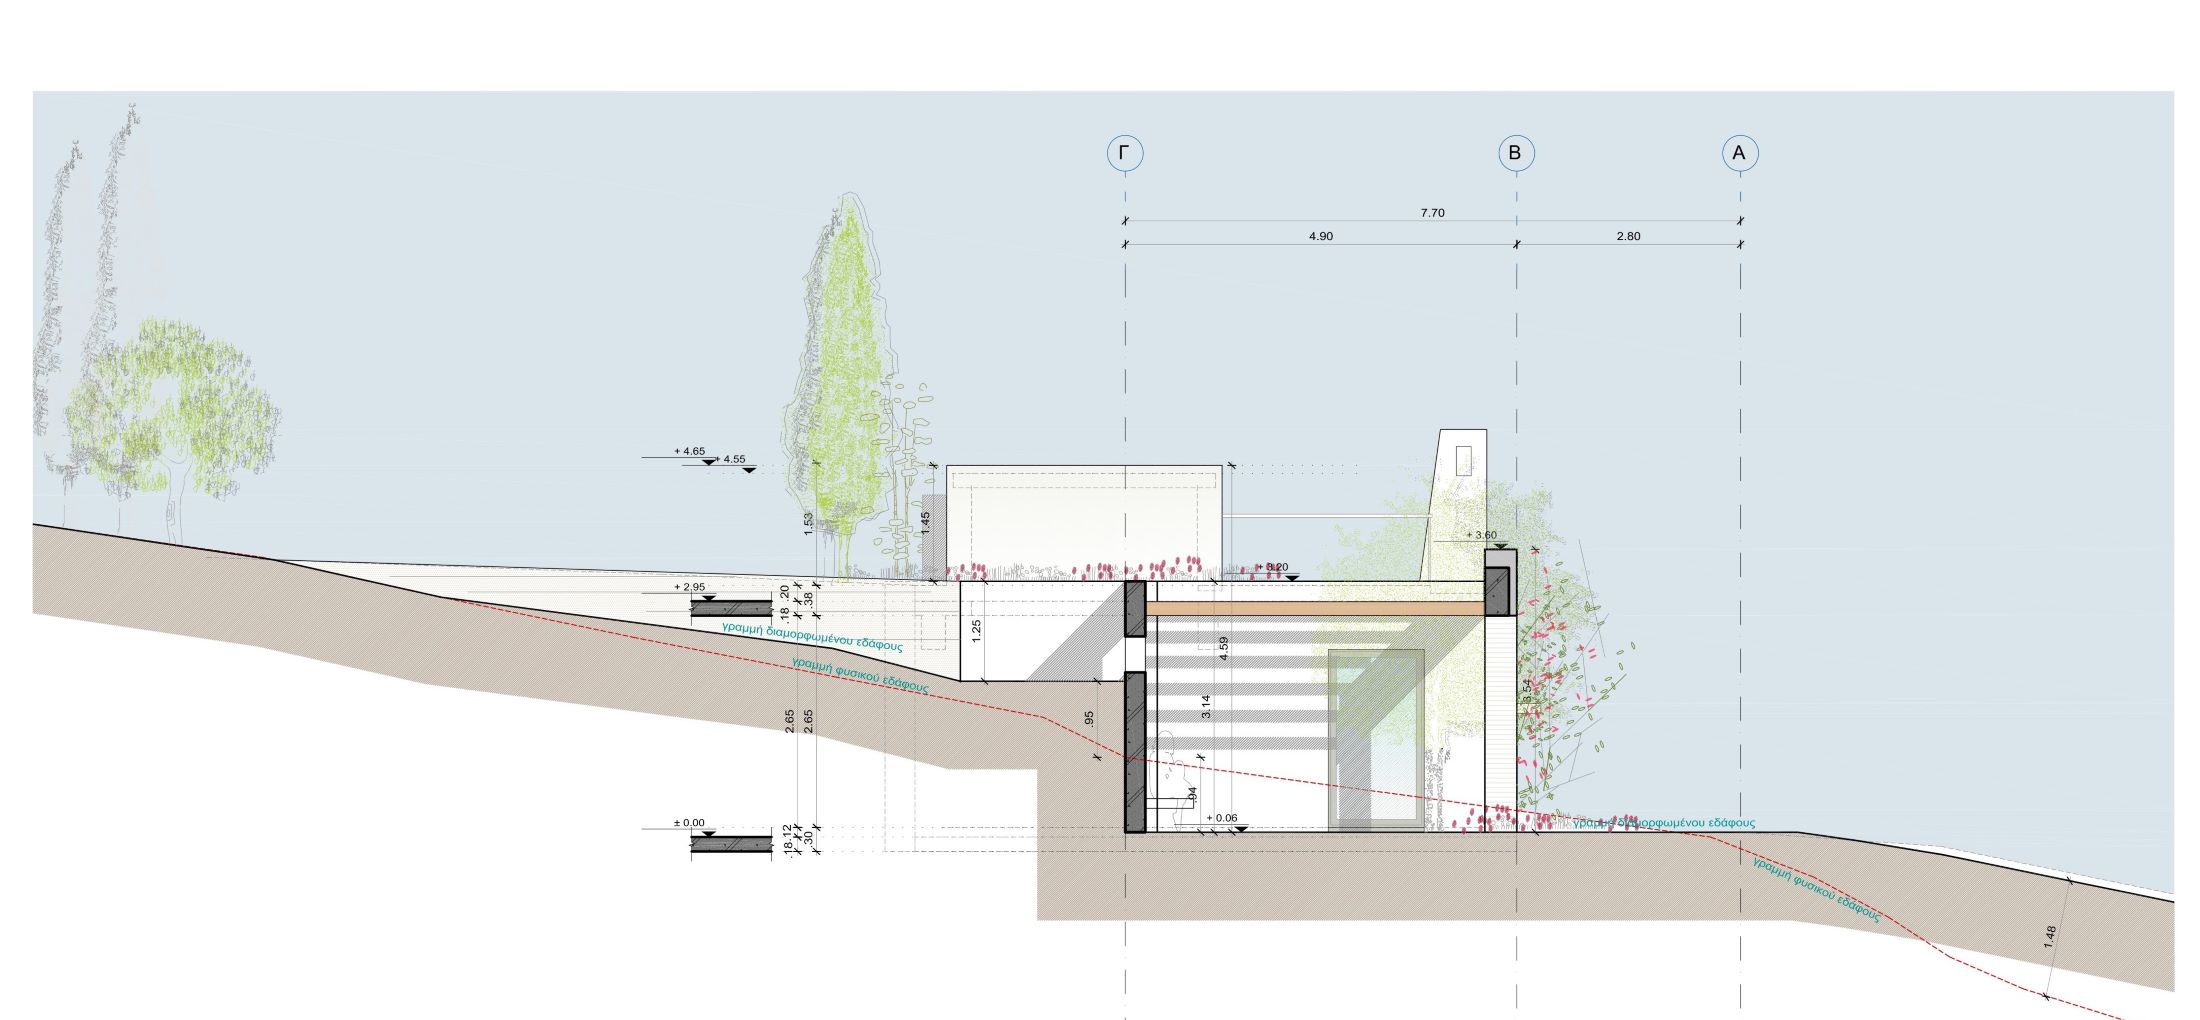 A14_west elevation_questhouse Layout1 (1)